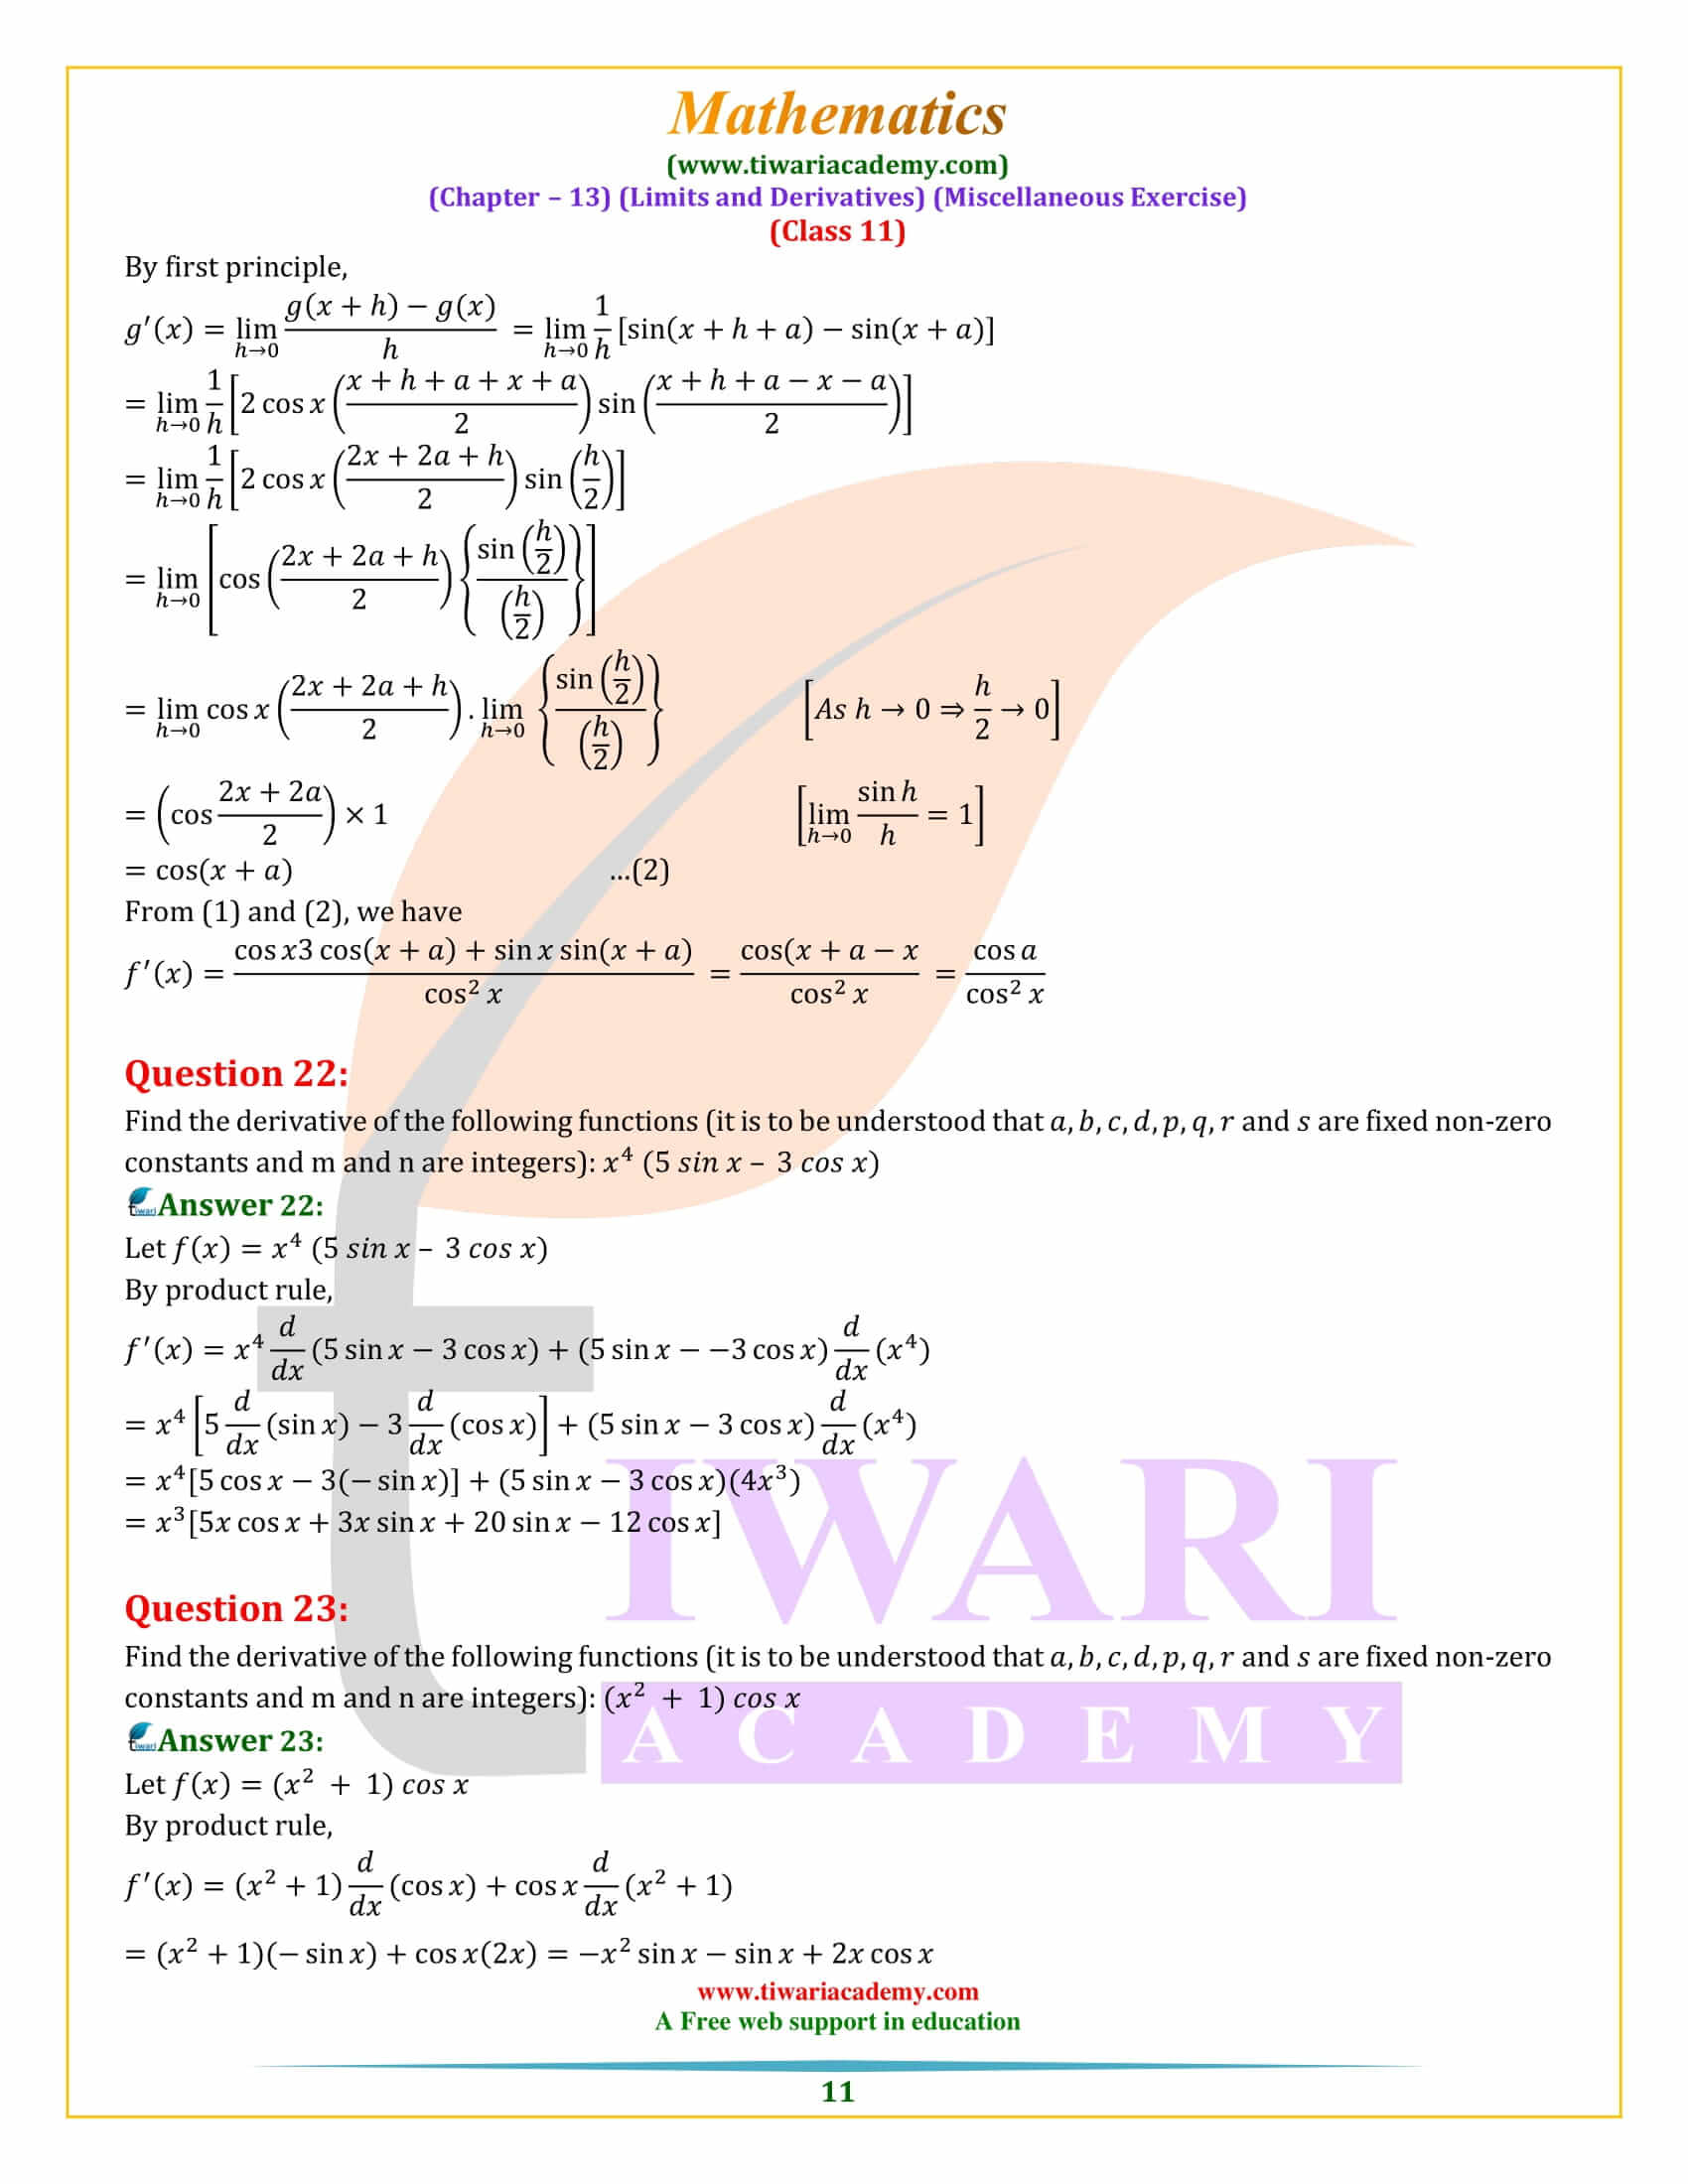 NCERT Solutions for Class 11 Maths Chapter 13 Miscellaneous Exercise in Hindi